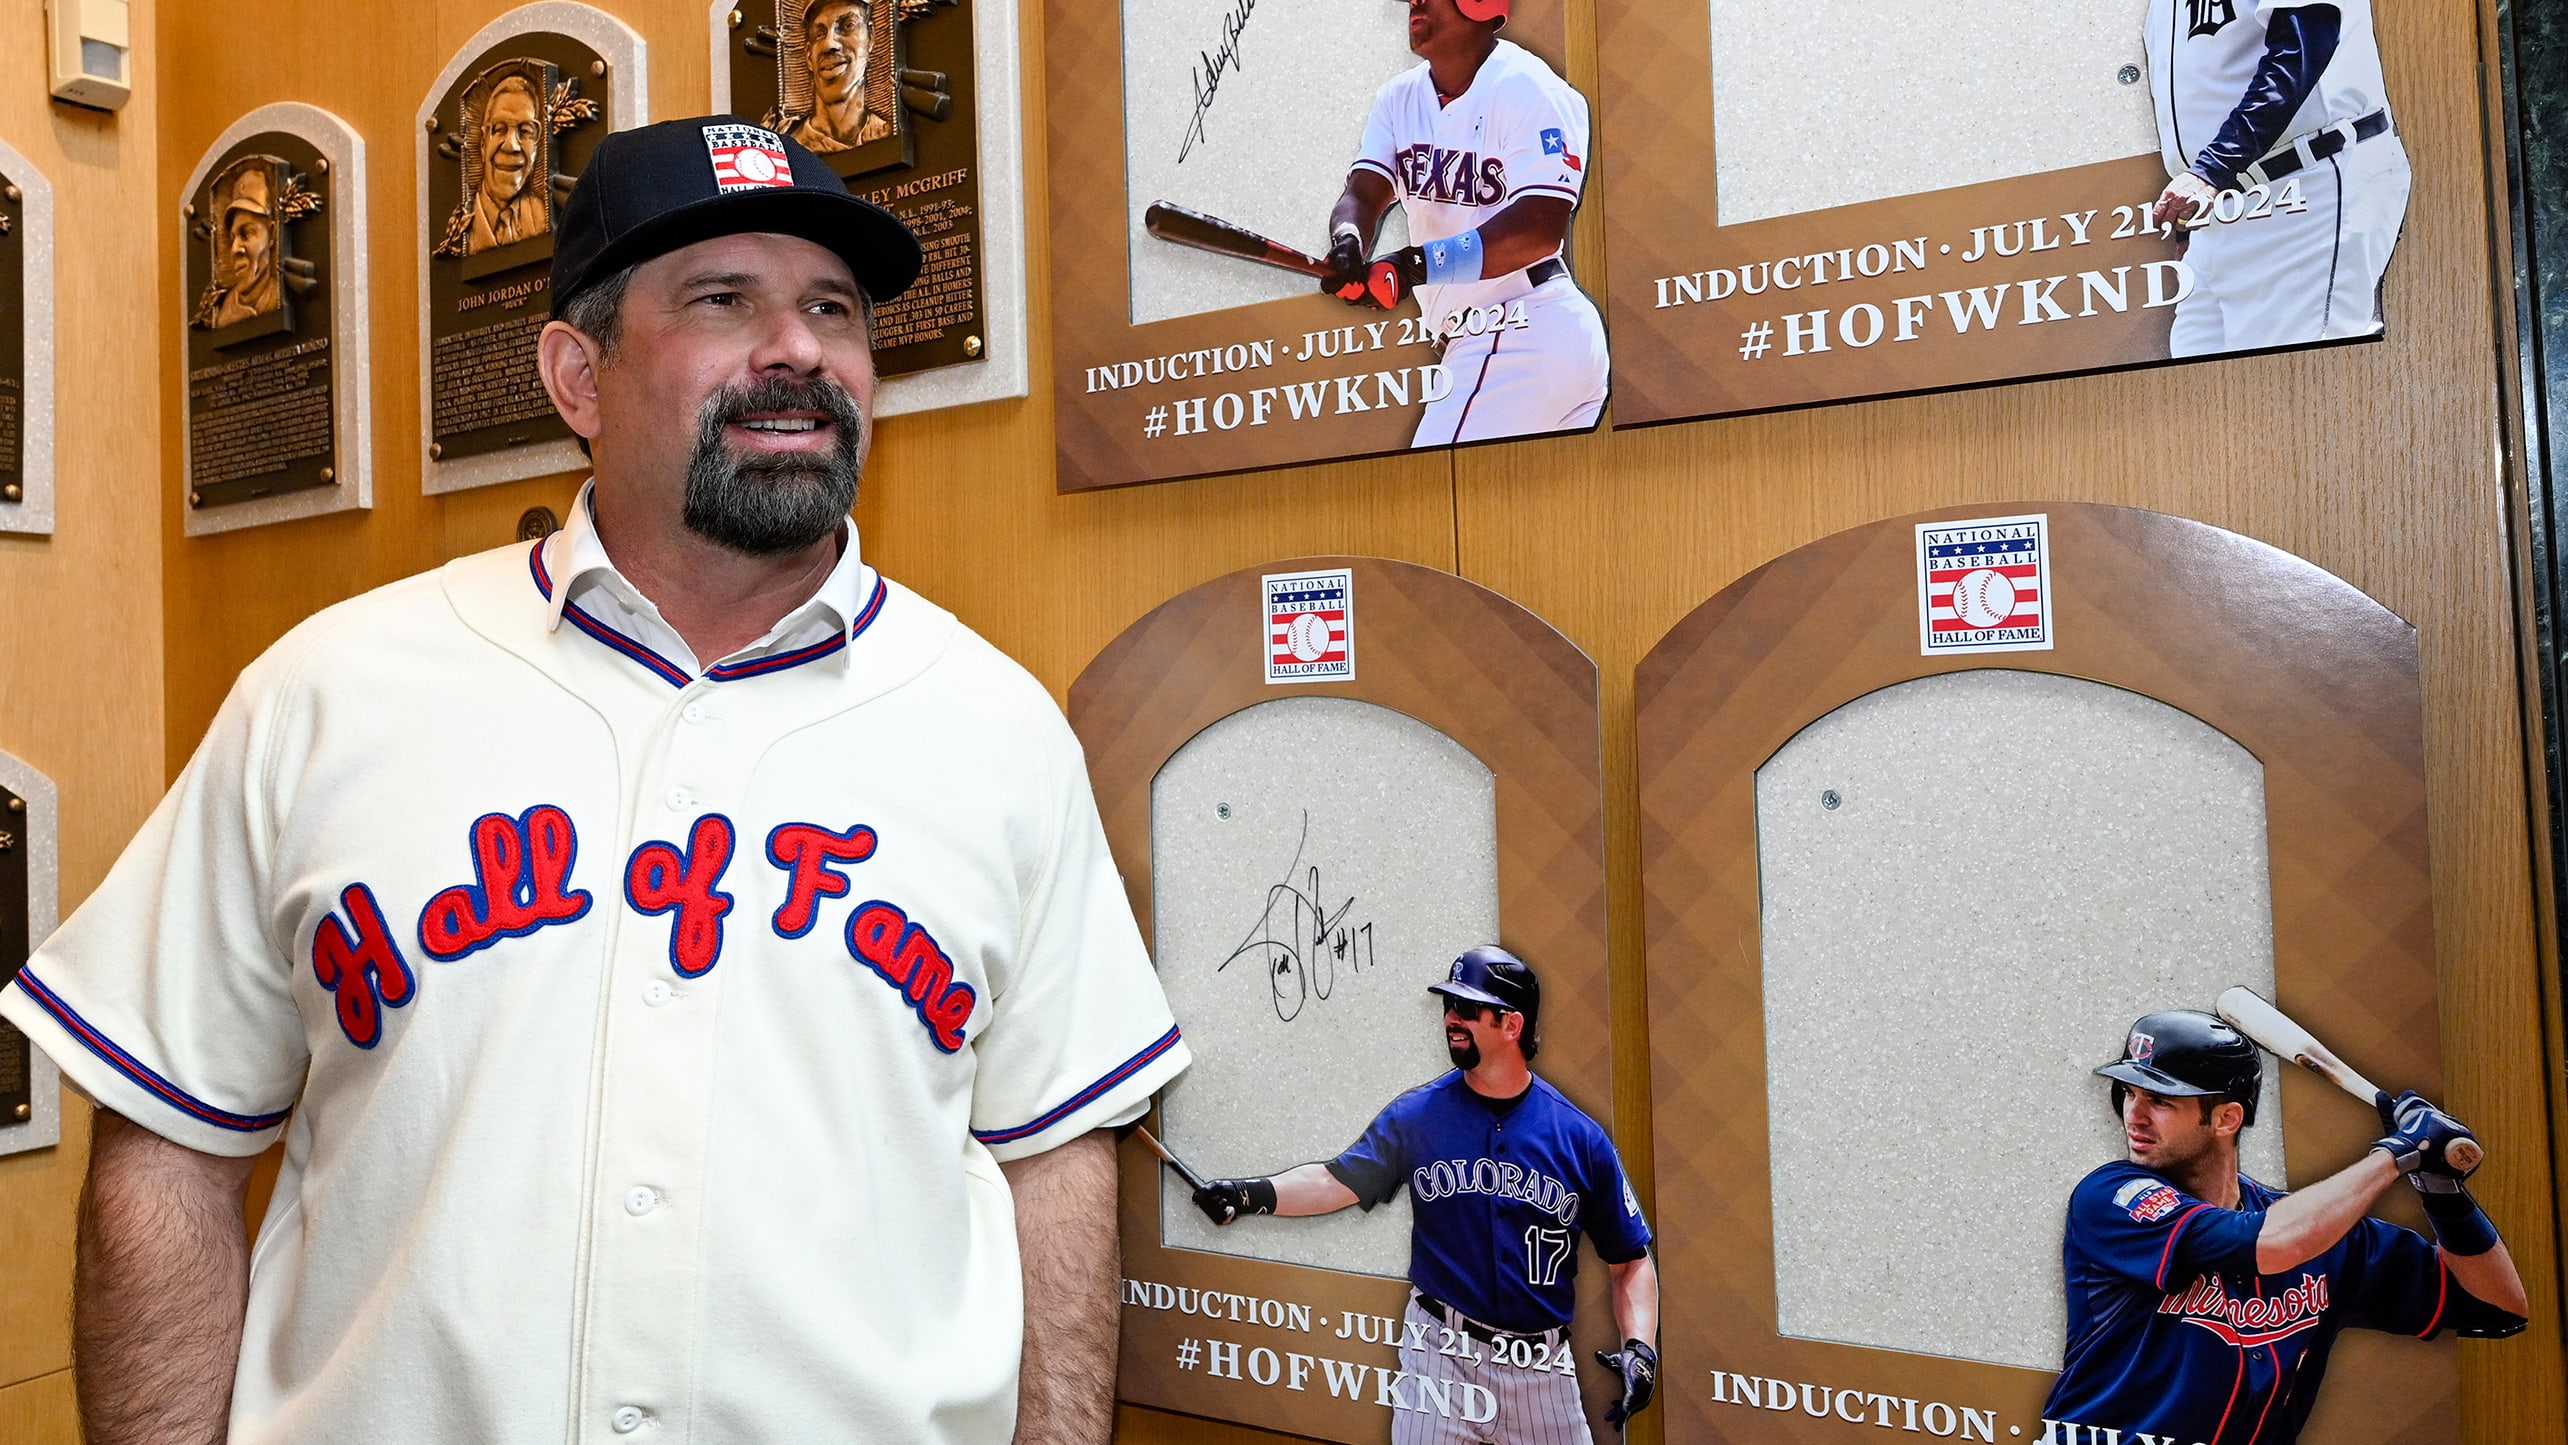 Todd Helton at the Hall of Fame